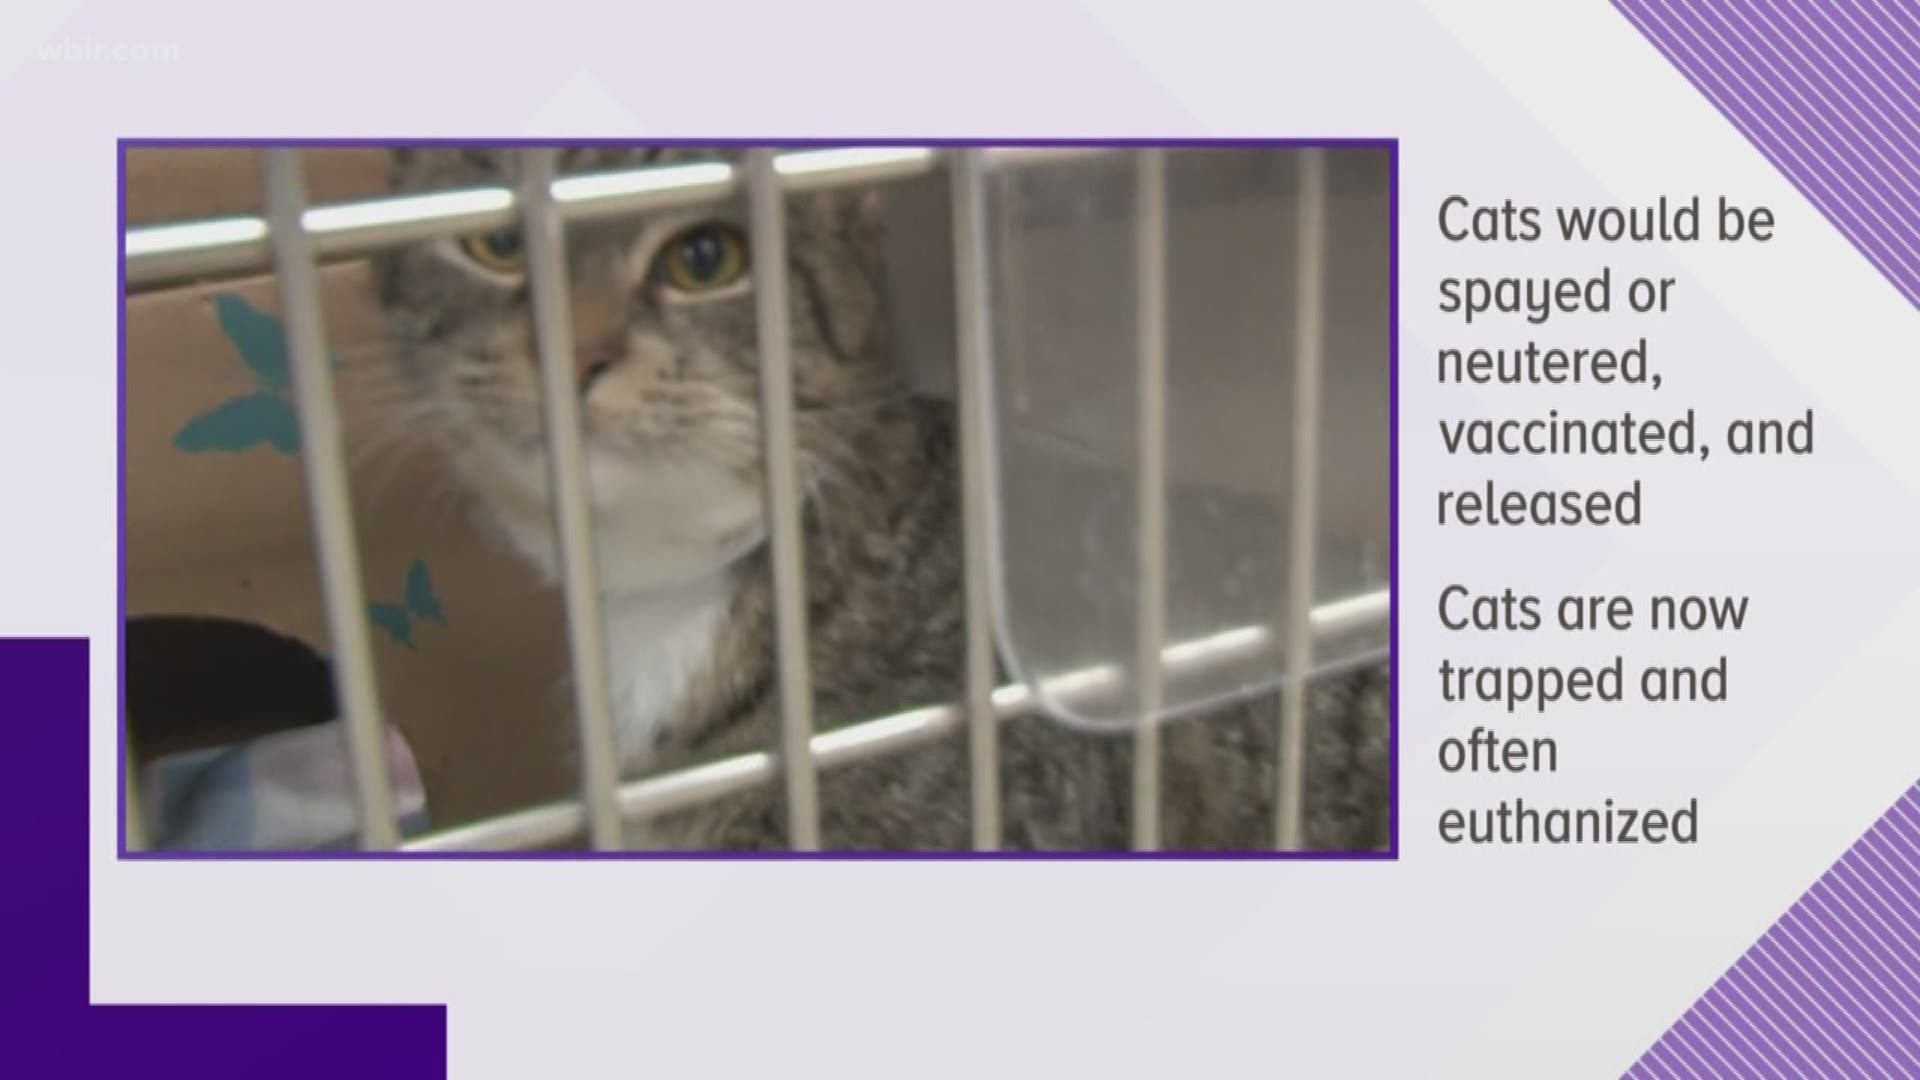 Under the new ordinance, cats would be spayed or neutered, vaccinated and then released right back where they were found. That's a change from the current practice of capturing stray cats and euthanizing them in an attempt to control the population.